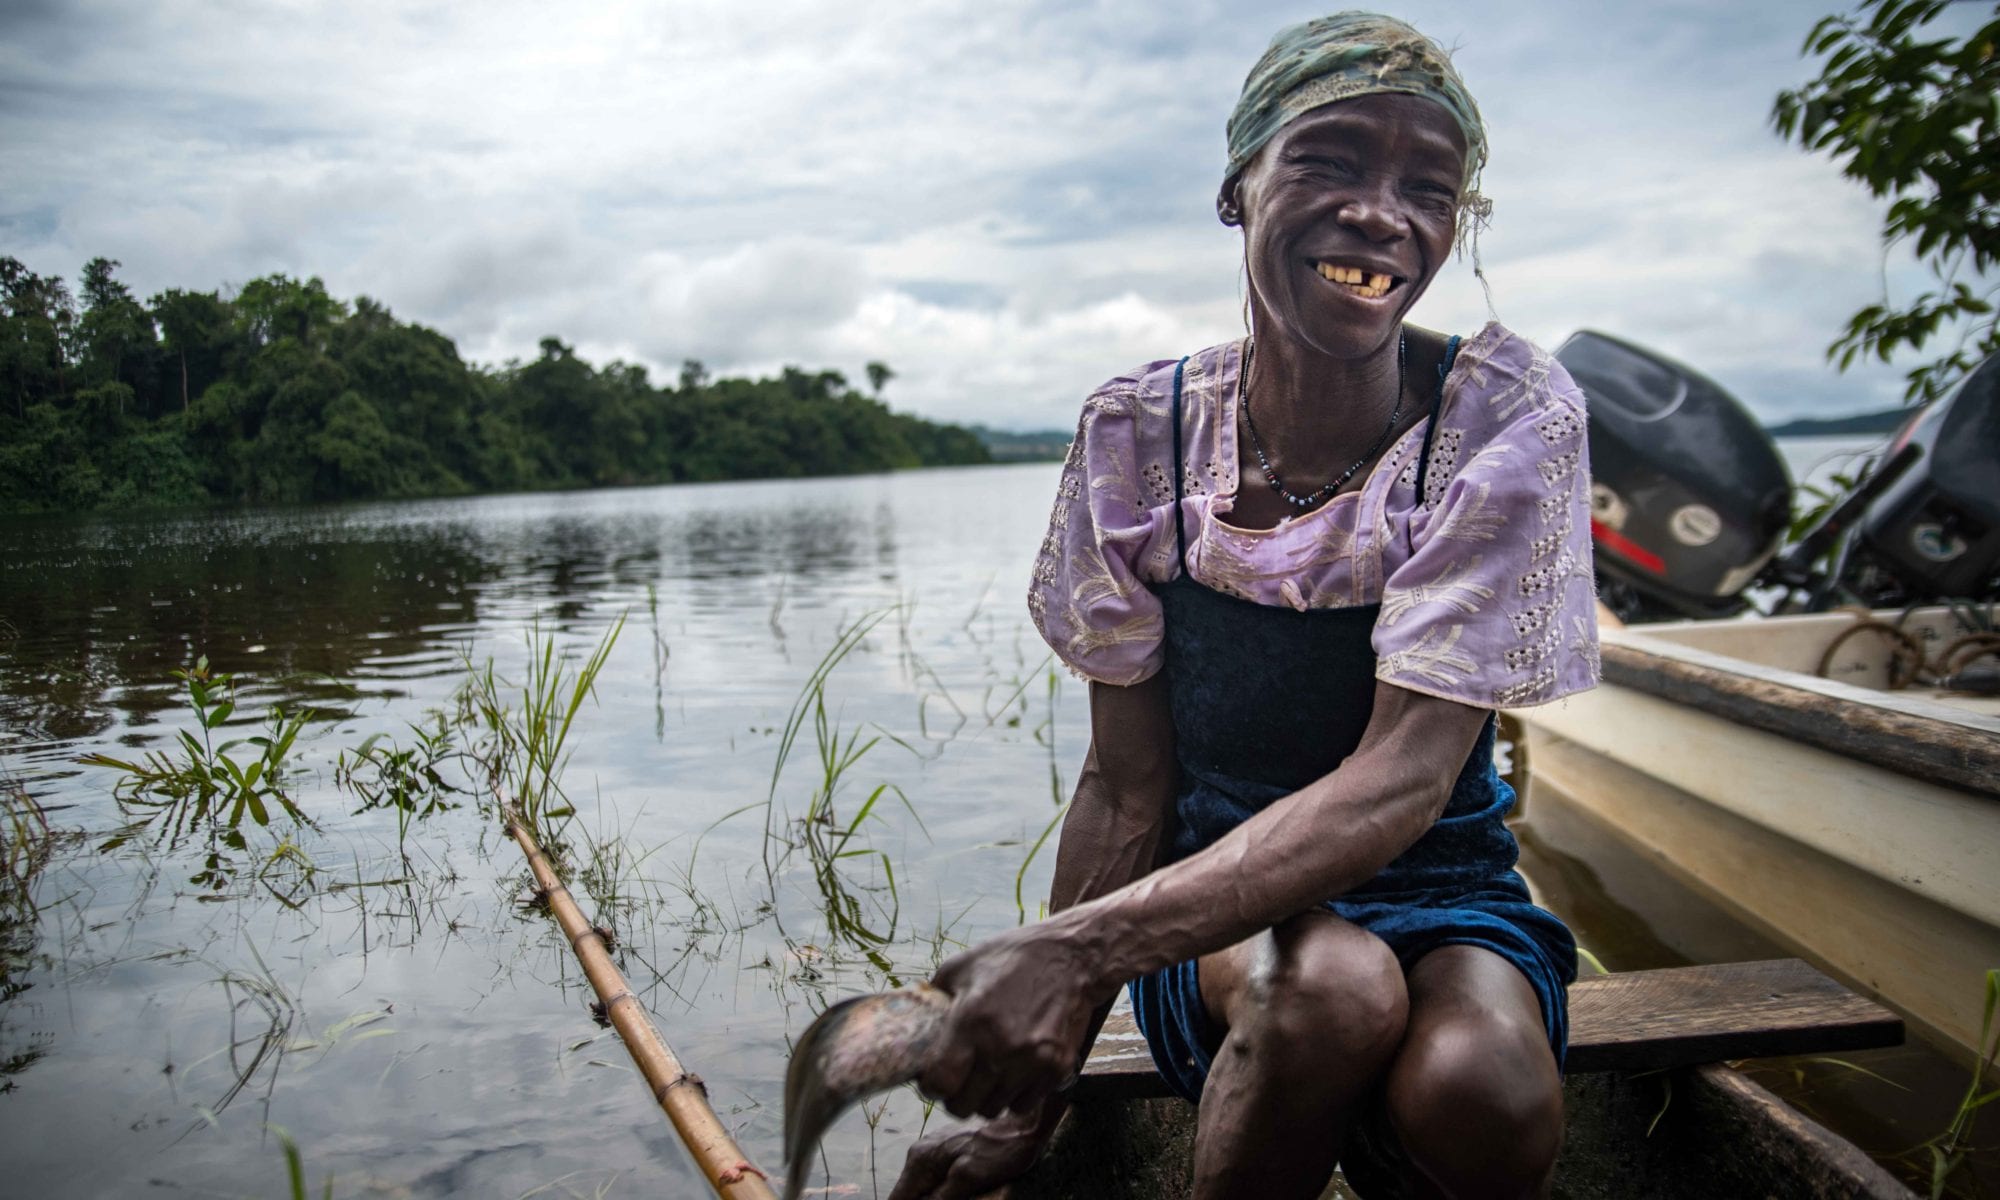 Woman fisher cleaning and cooking fish on Aschouka on Lake Oguemoué